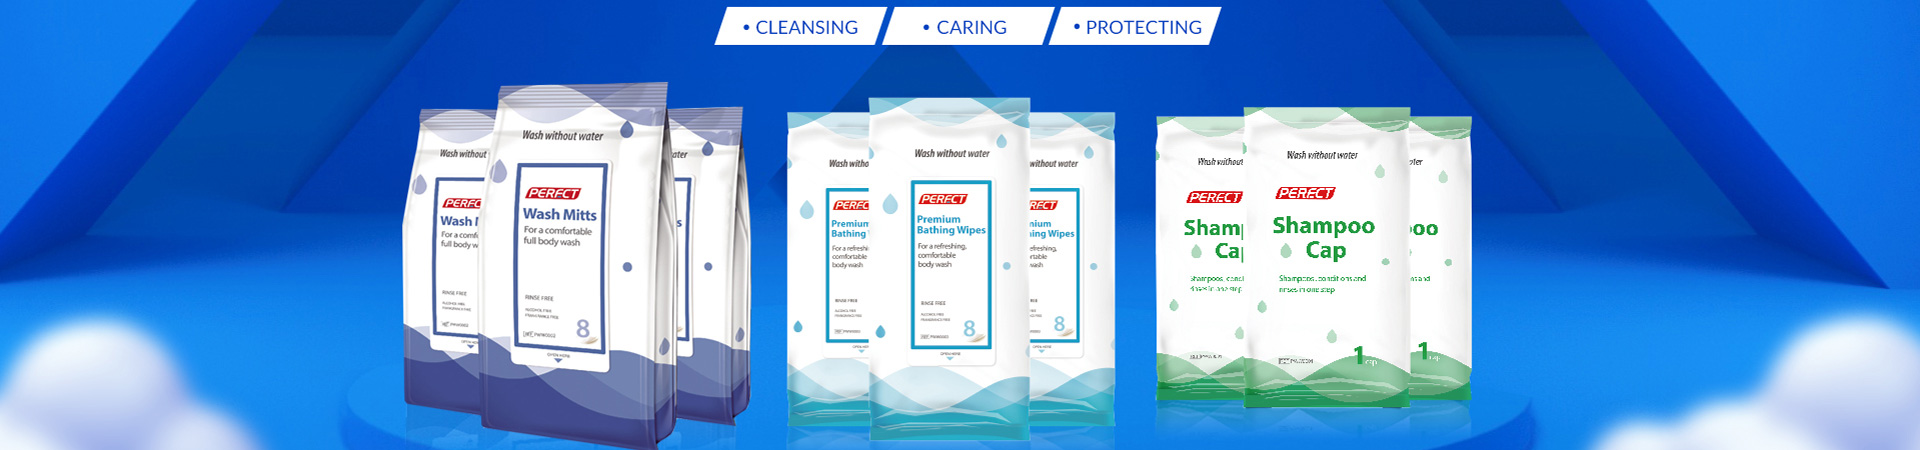 Surface Cleansing&Disinfection Wipes